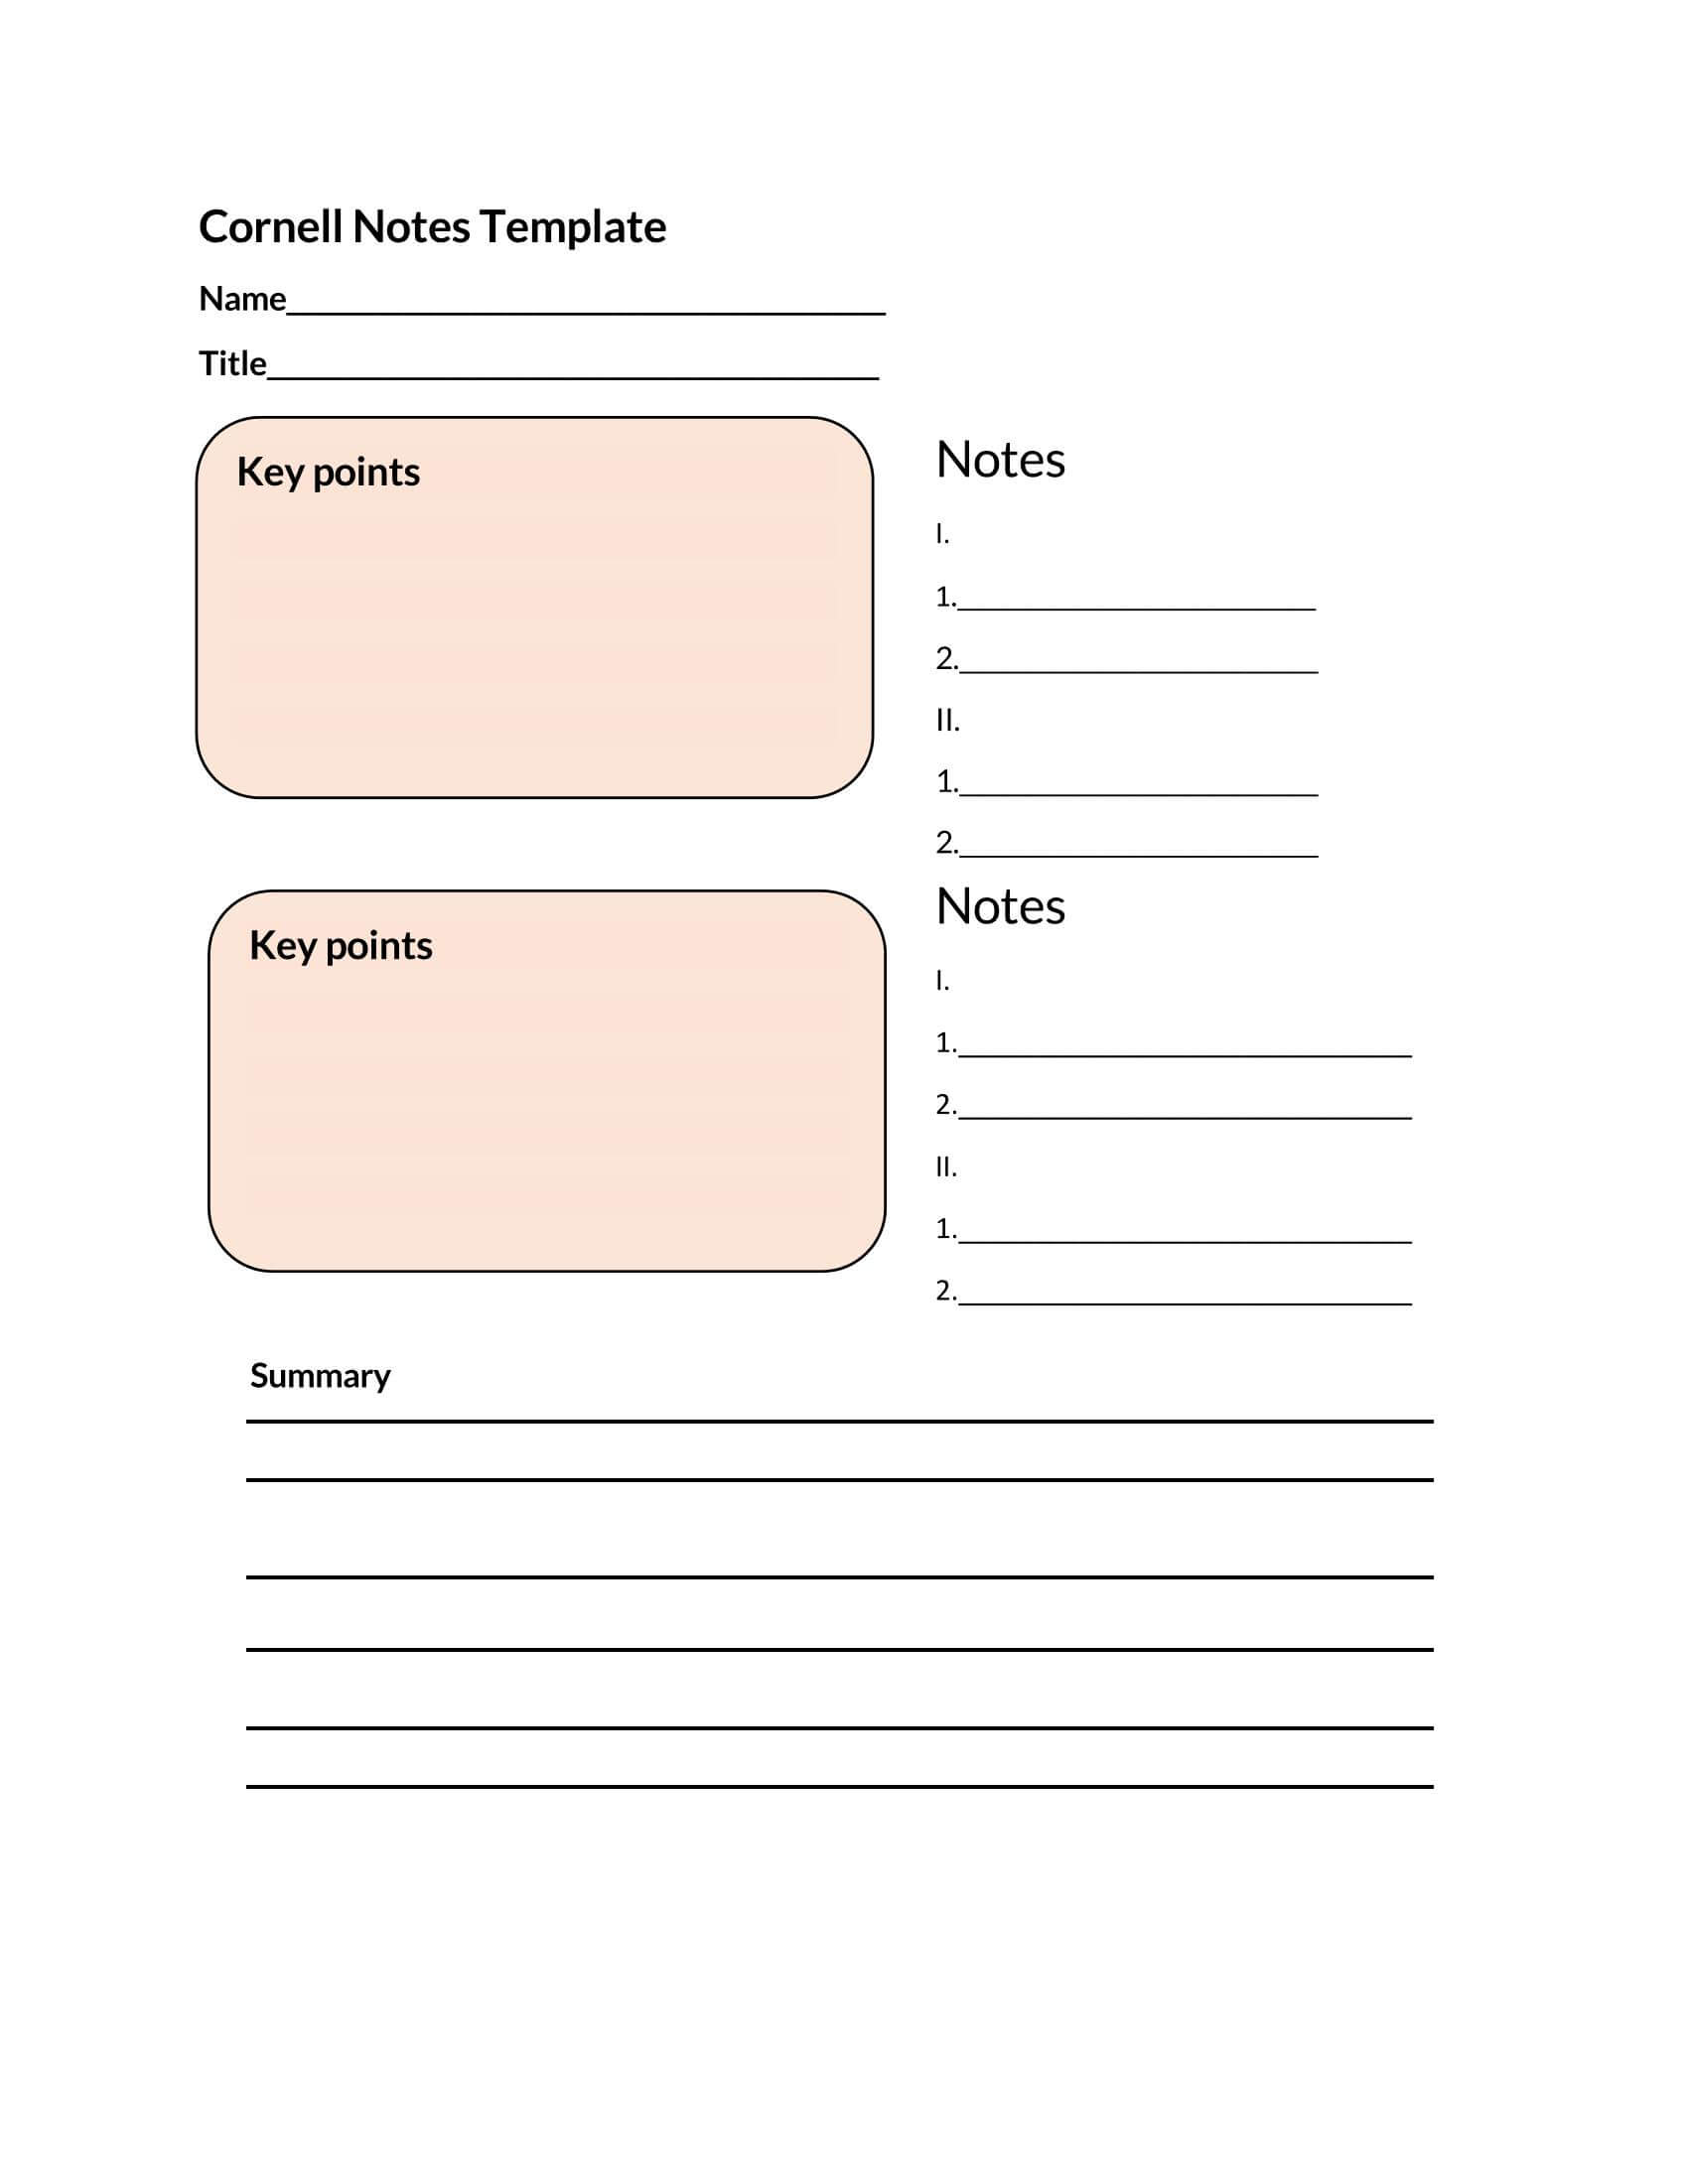 Free Cornell Note Example PDF